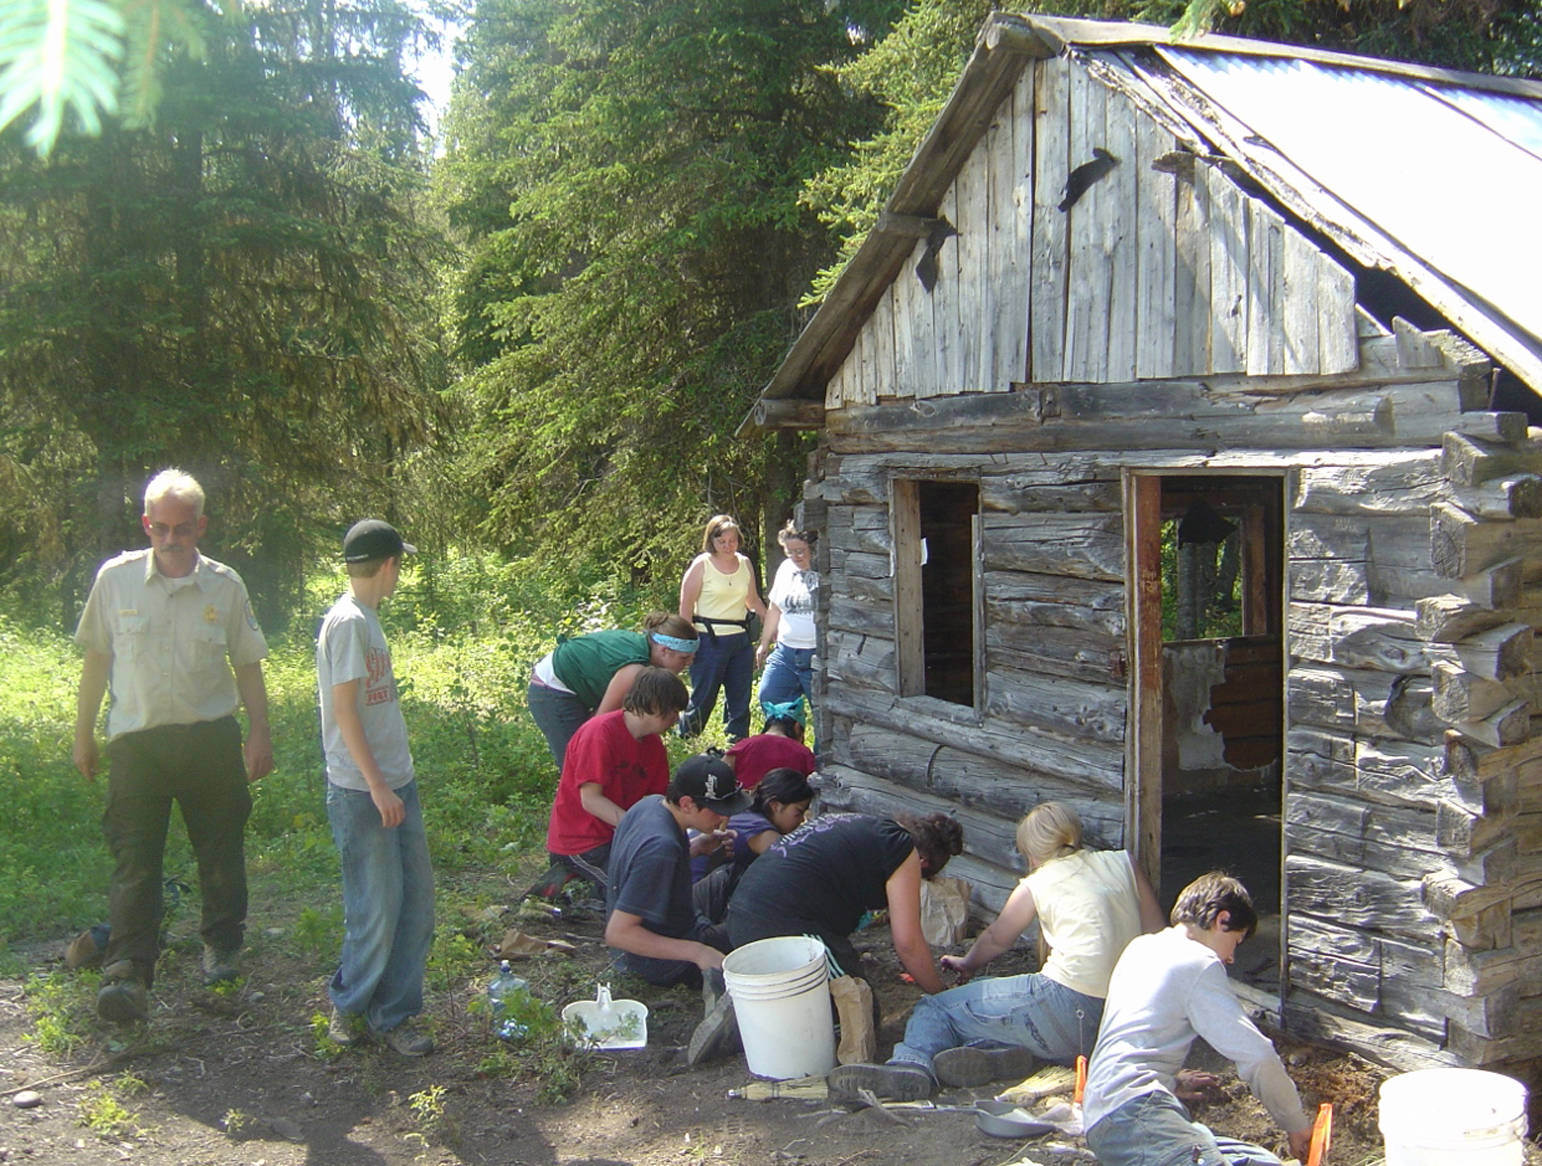 Kids from the Kenaitze Indian Tribe Susten Archaeology Camp excavate around a historical cabin in preparation for it be moved by Gary Titus from the Kenai National Wildlife Refuge. (Photo provided)